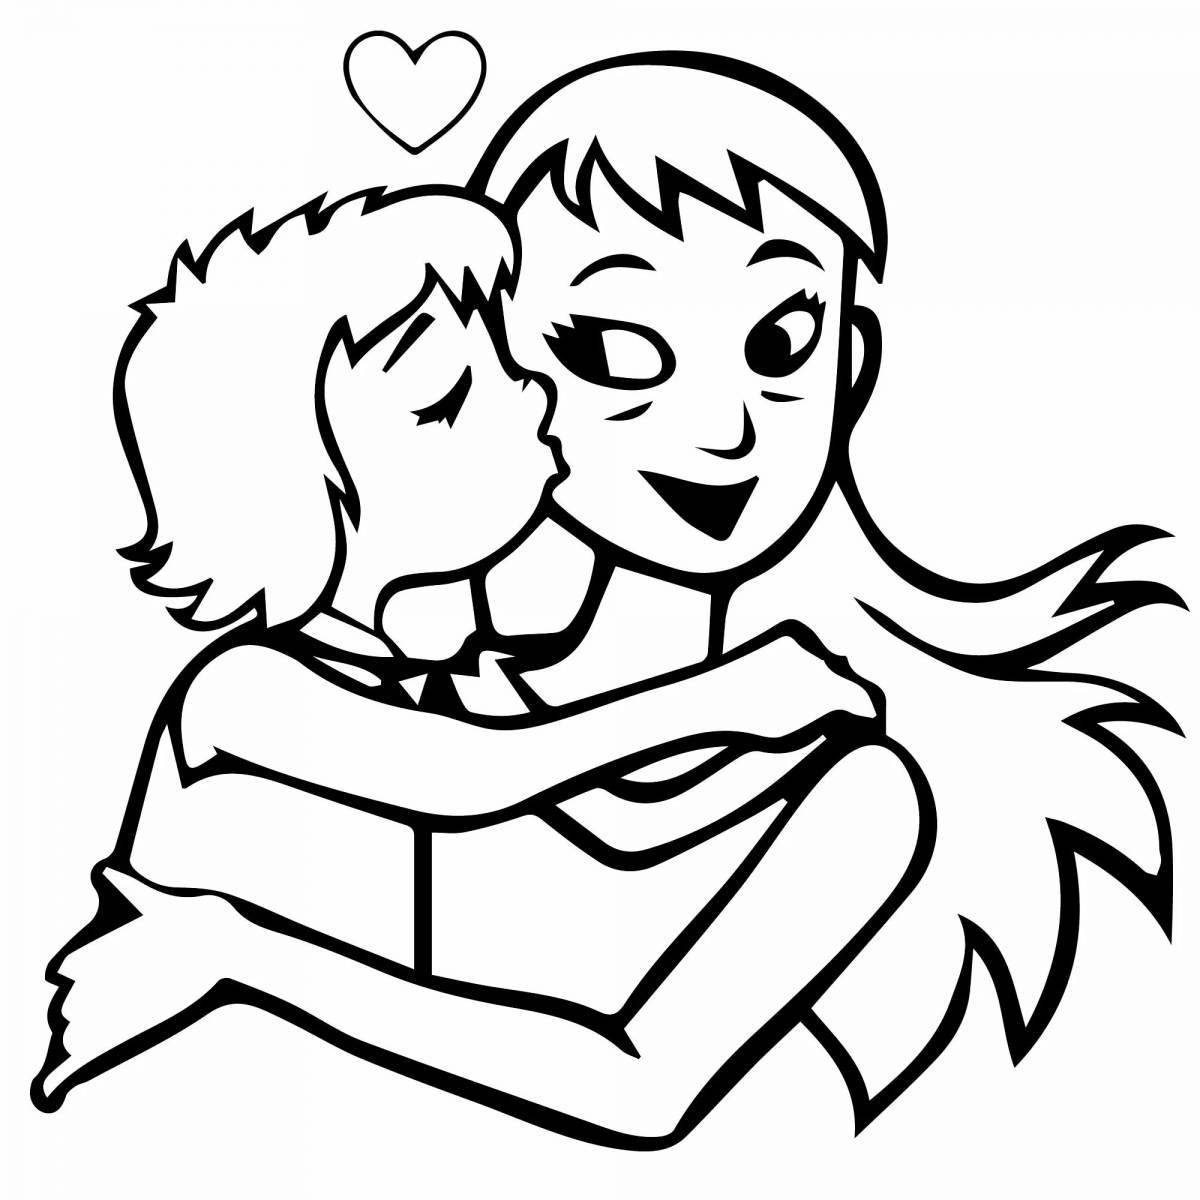 Coloring page heavenly mom and baby